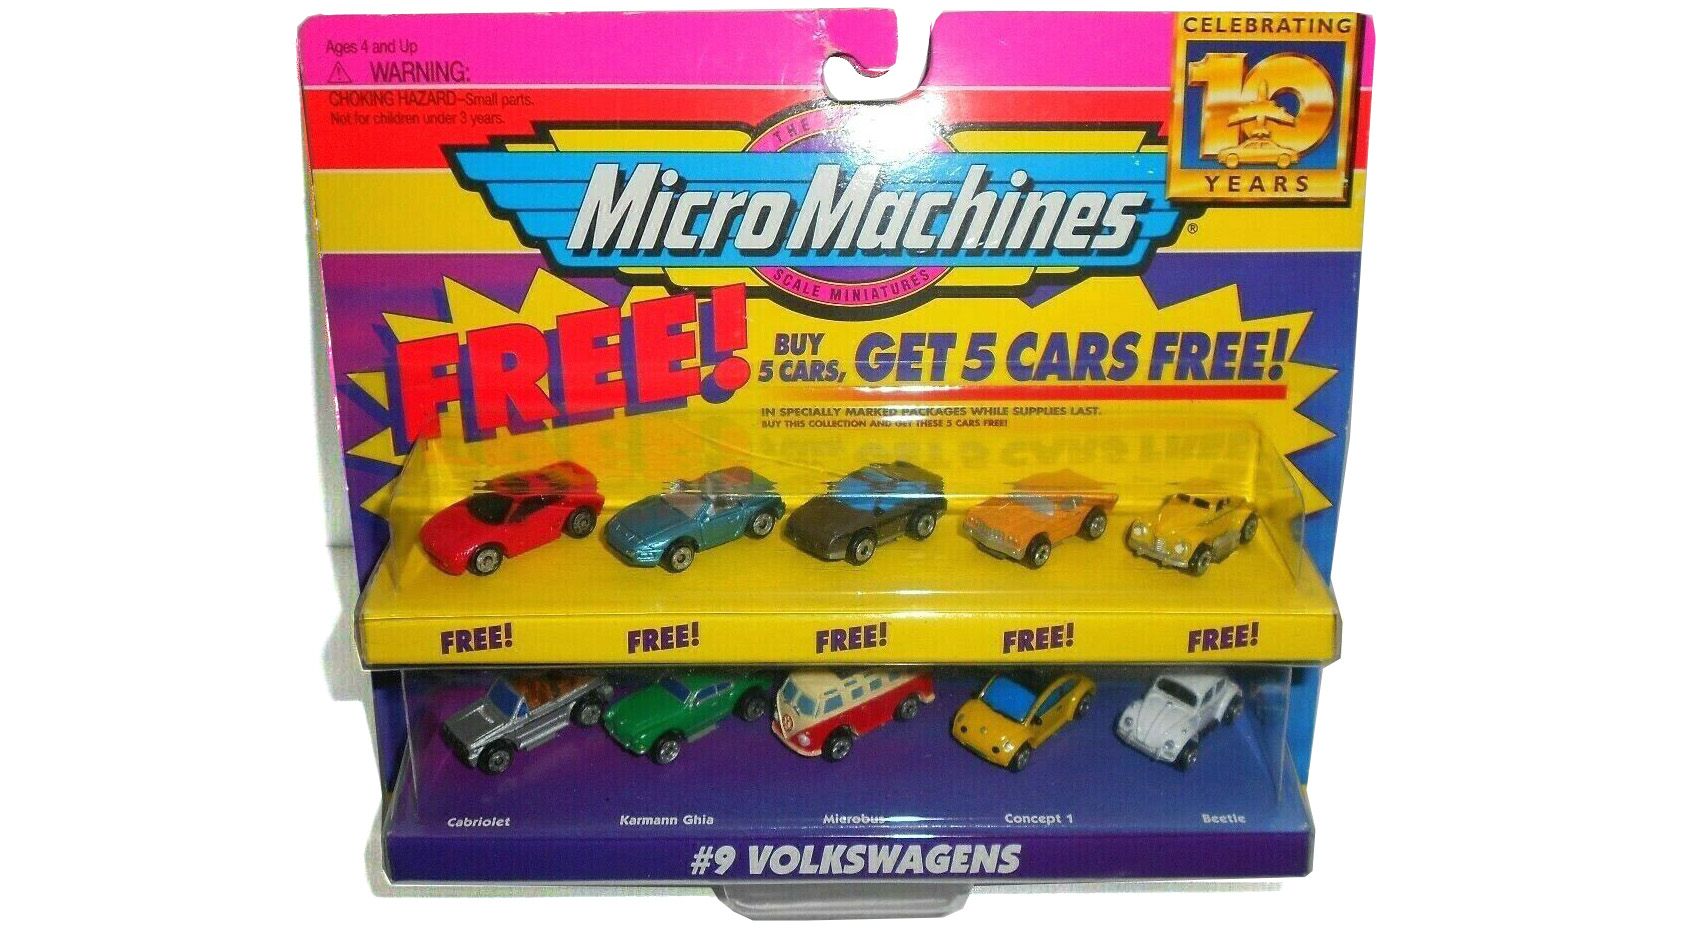 Micro Machines will be revived by toymaker Hasbro: small cars, trucks,  'Star Wars' and 'Star Trek' ships and other vehicles